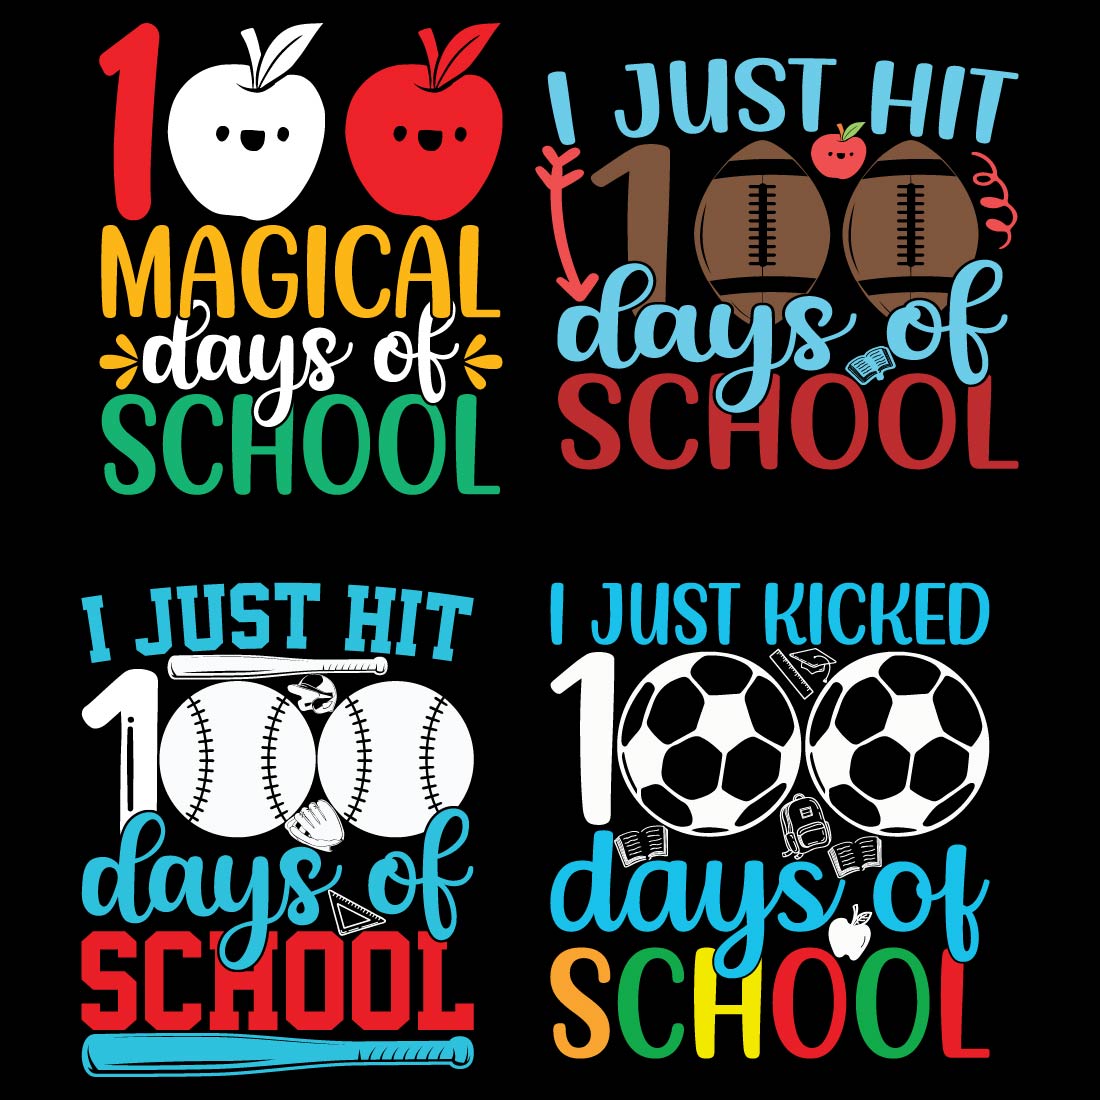 4 Typography 100 Days of School SVG Bundle T-shirt Design Vector Template cover image.